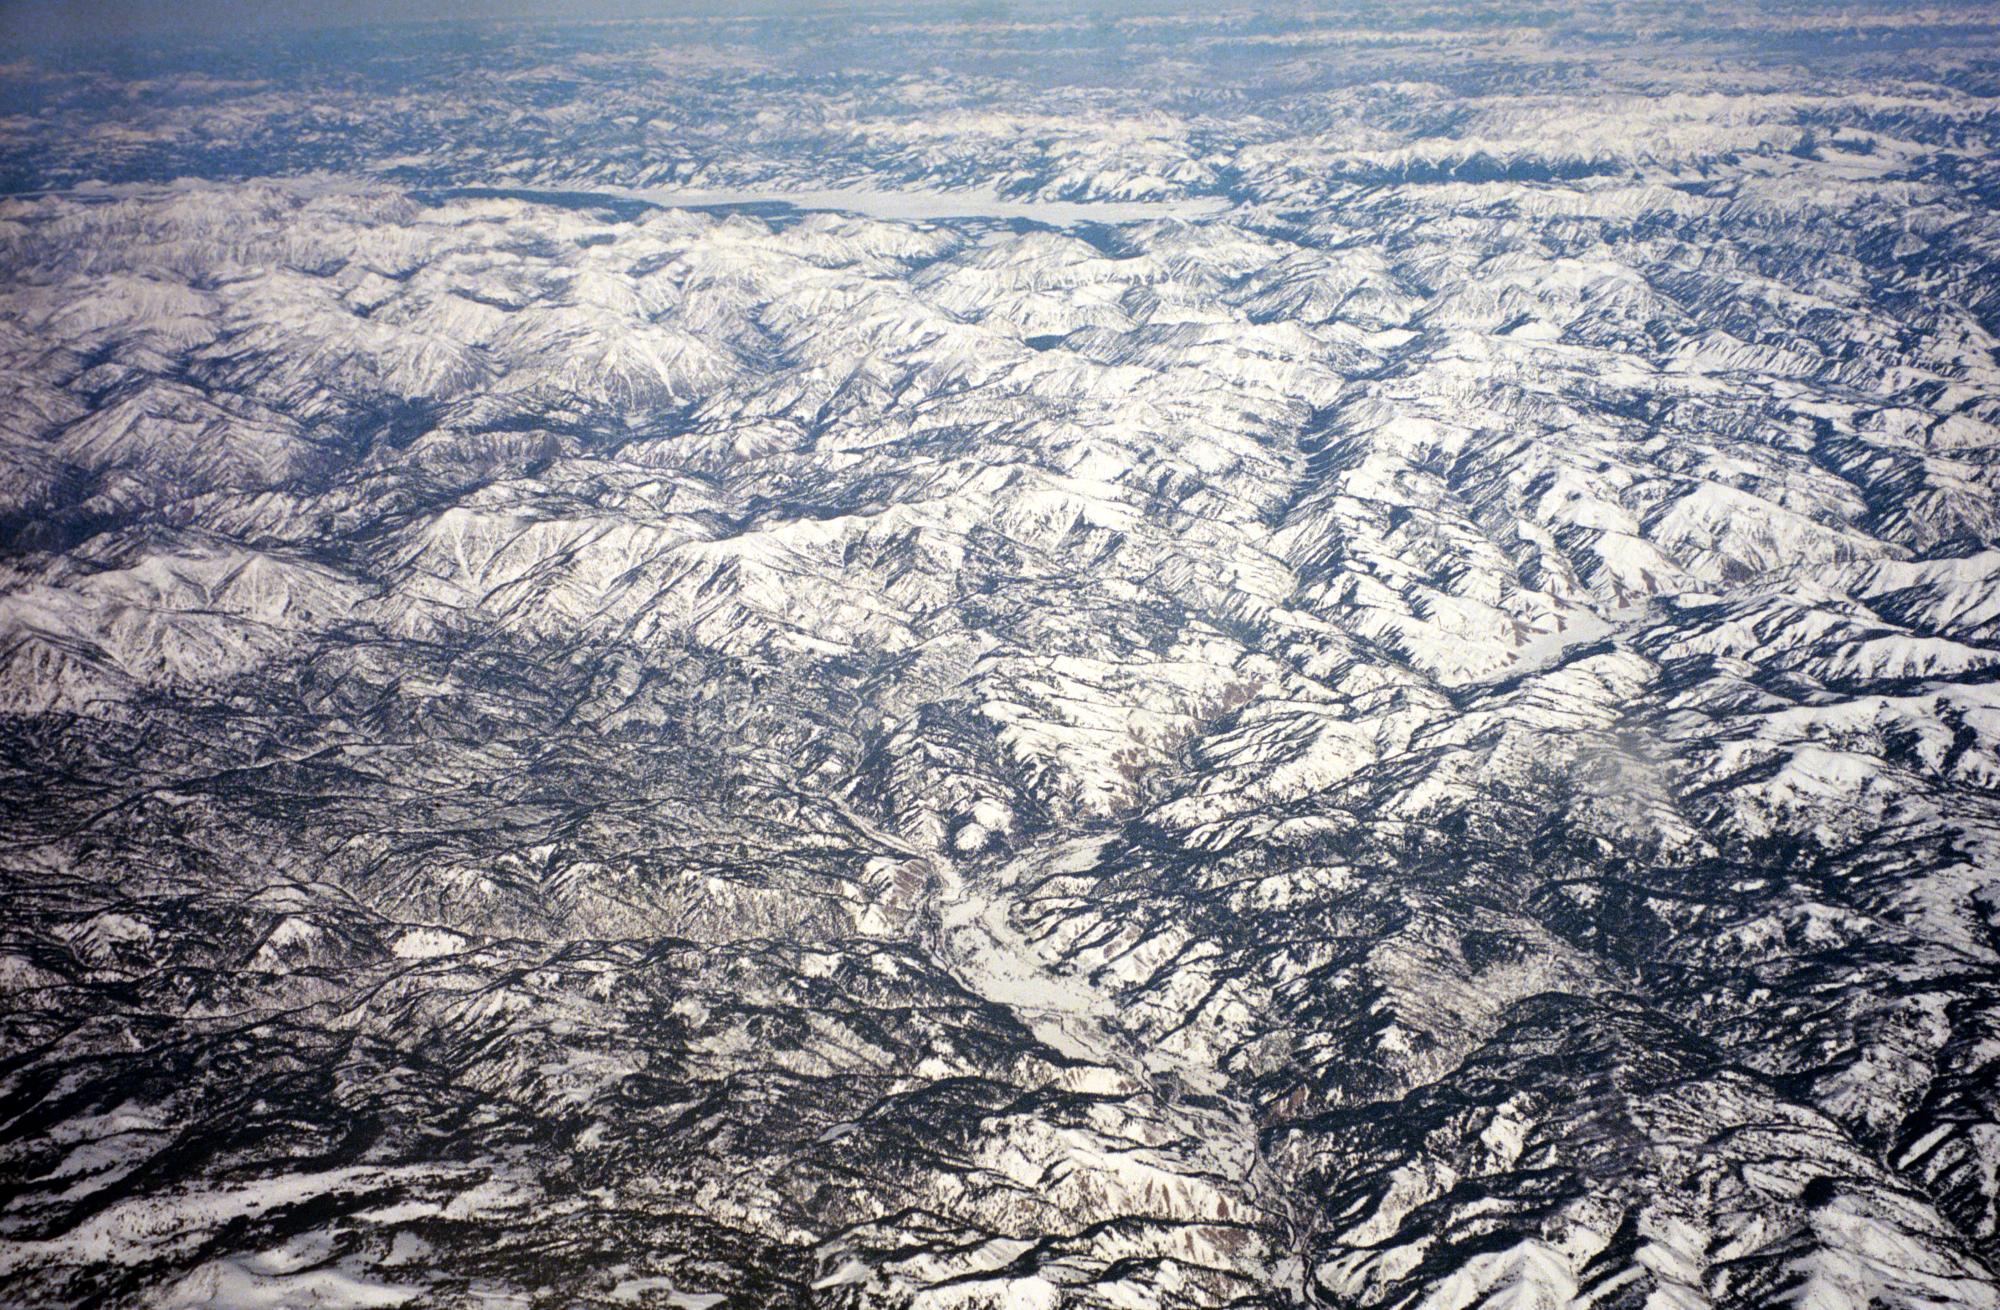 Western US - Snowcovered